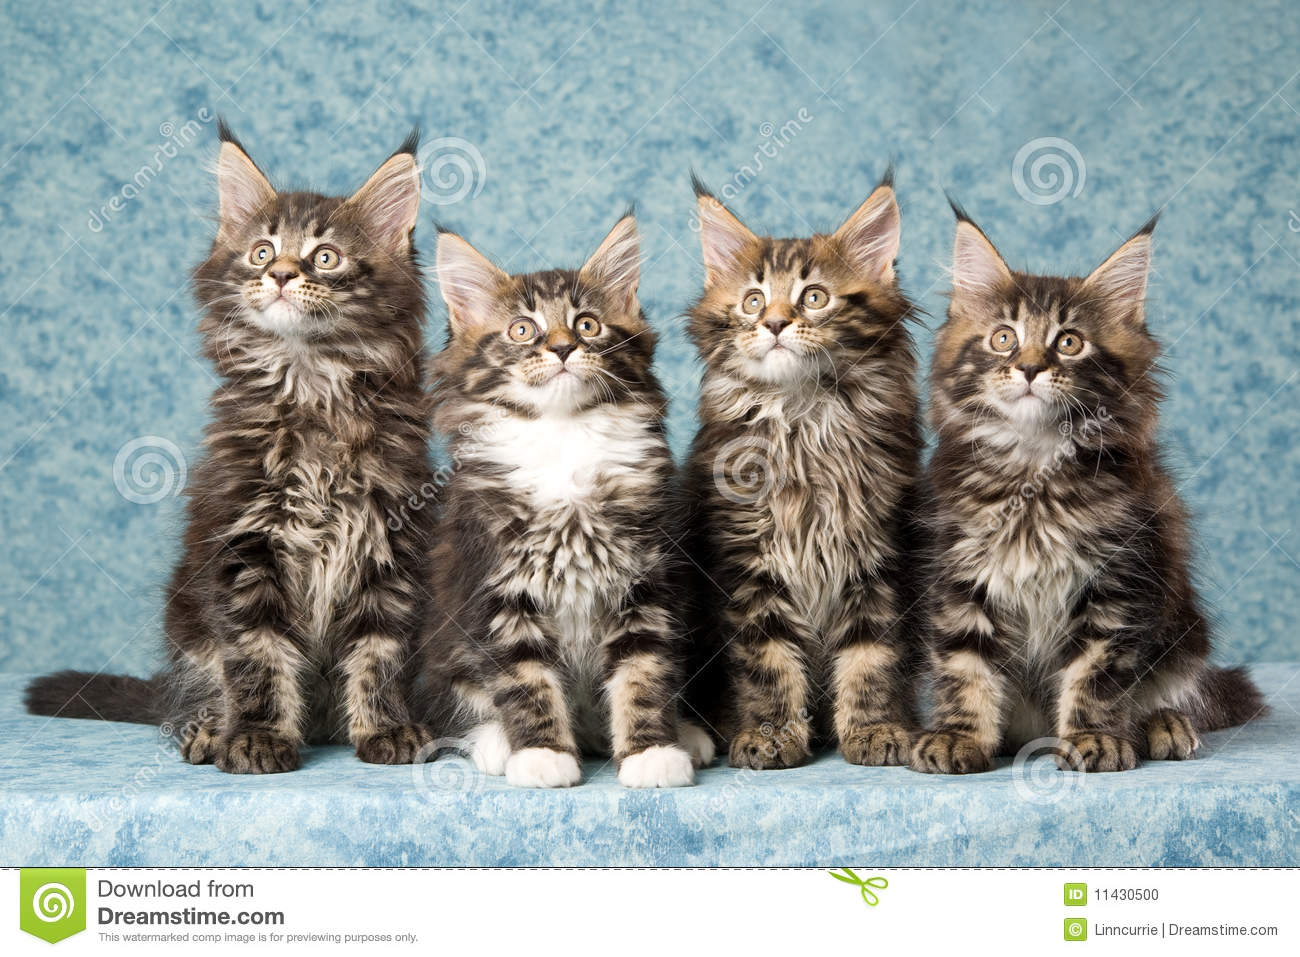 Four Tabby Maine Coon Kittens